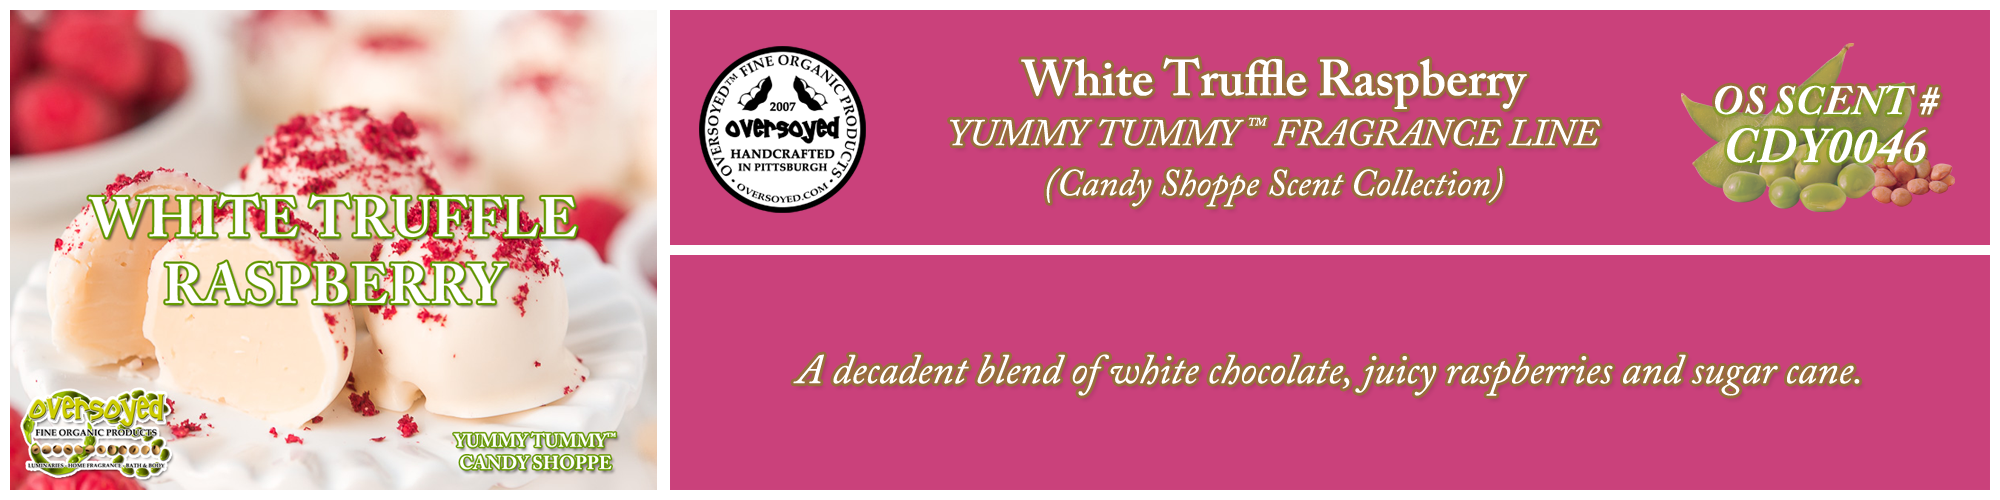 White Truffle Raspberry Handcrafted Products Collection